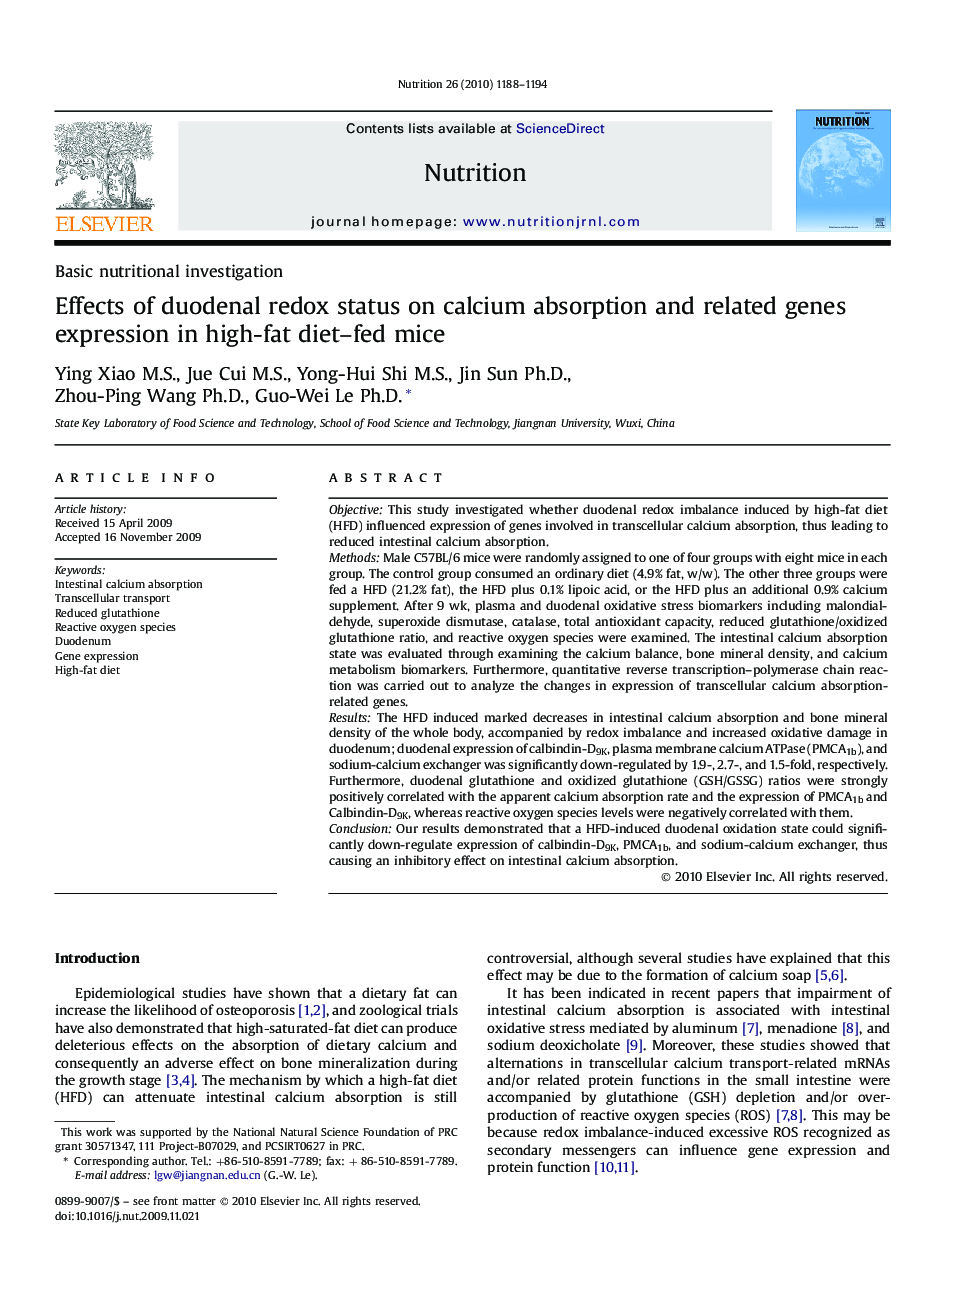 Effects of duodenal redox status on calcium absorption and related genes expression in high-fat diet–fed mice 